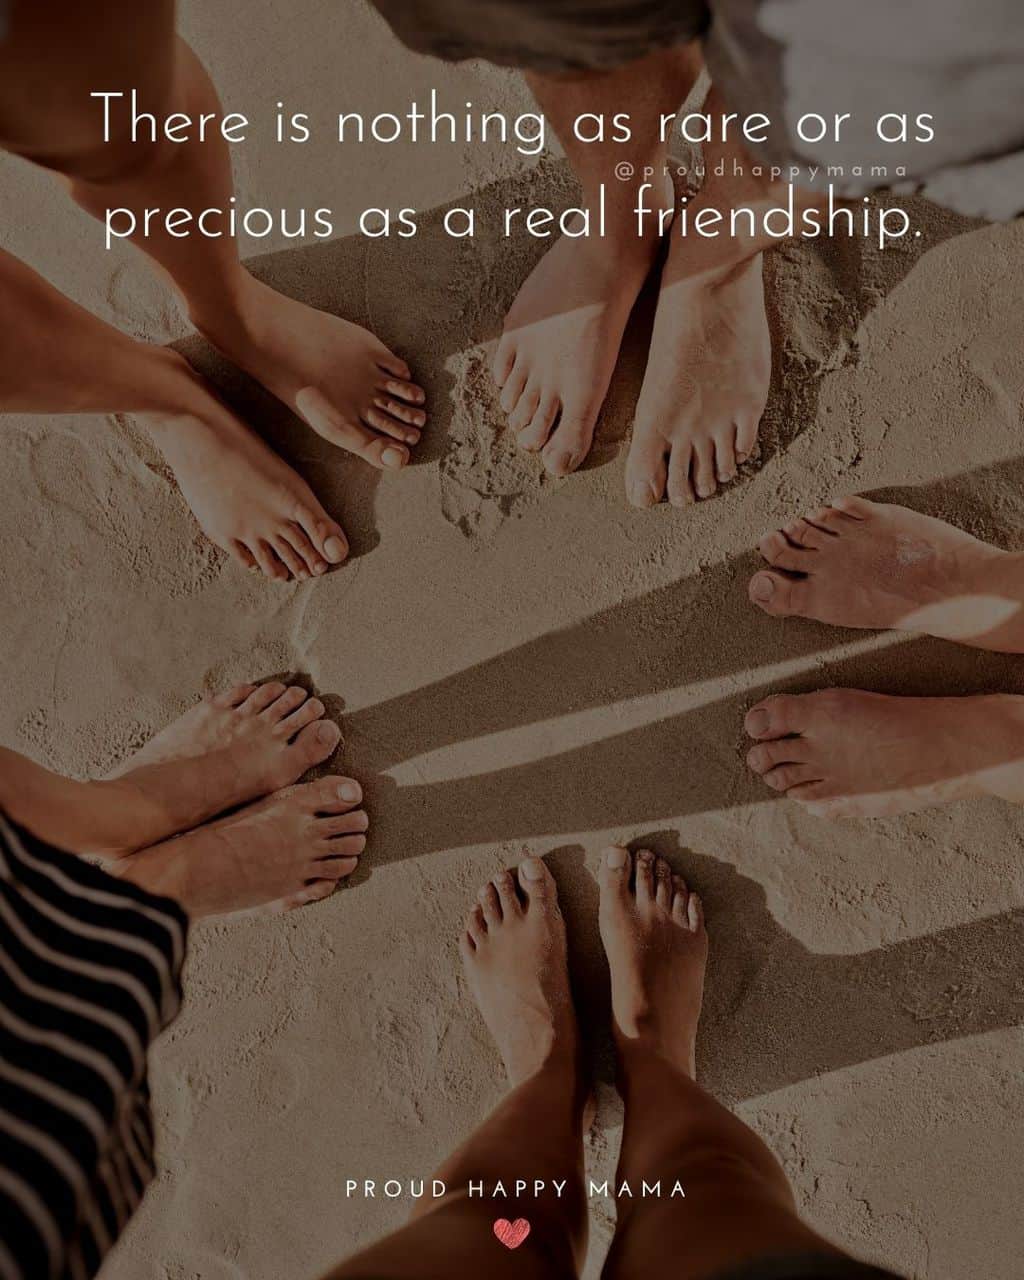 100+ Meaningful Friendship Quotes And Sayings [With Images]